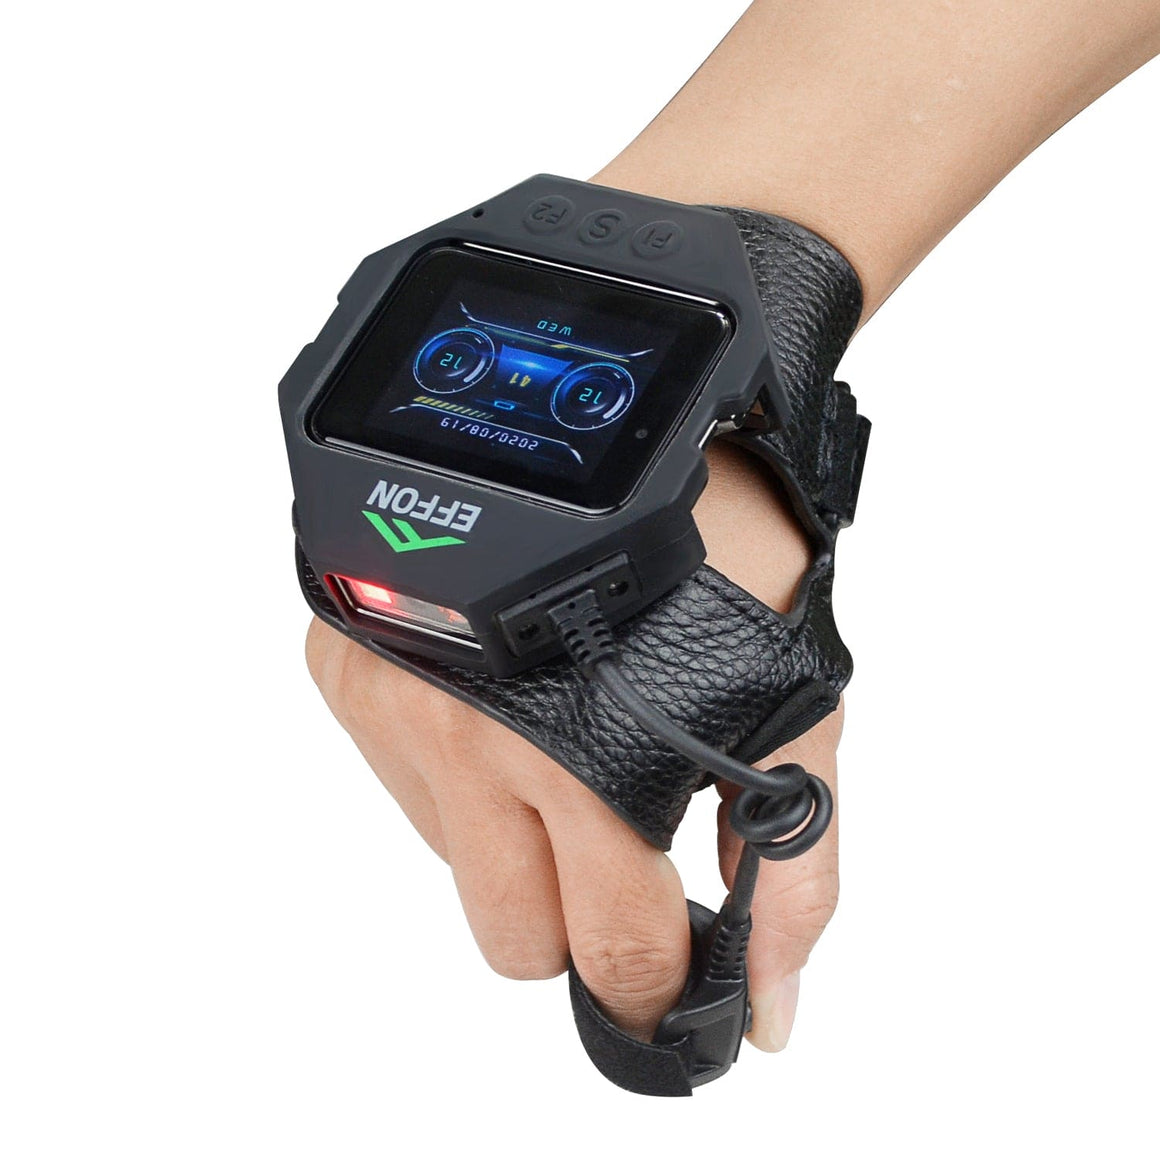 Wearable 2D Glove Barcode Scanner with Display EW02